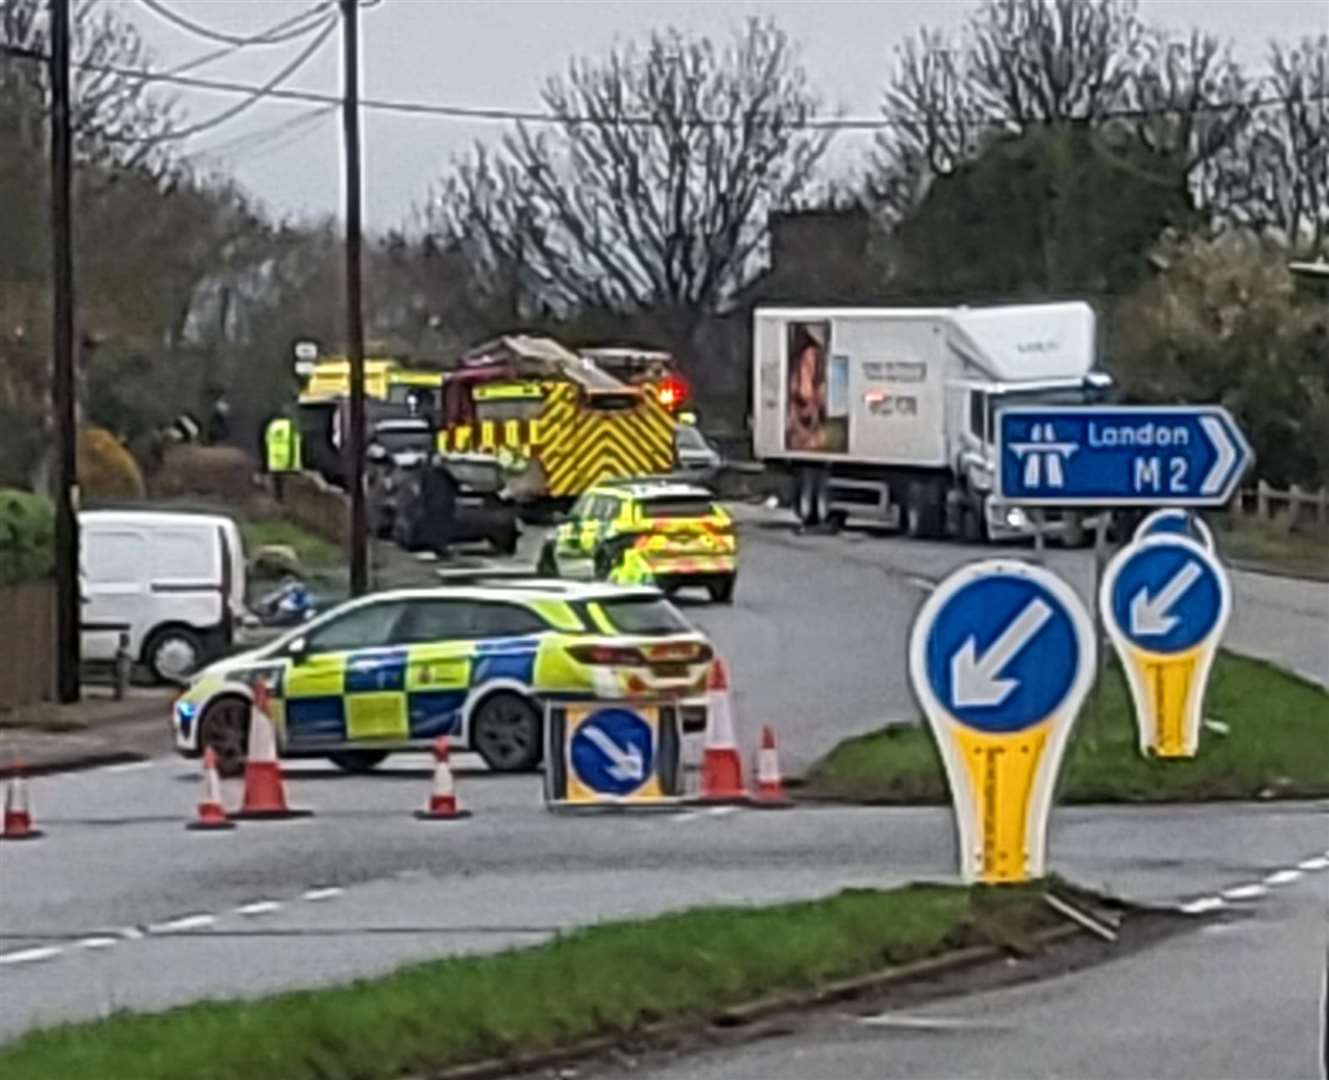 The A251 in Faversham was blocked near the M2 junction following the fatal crash